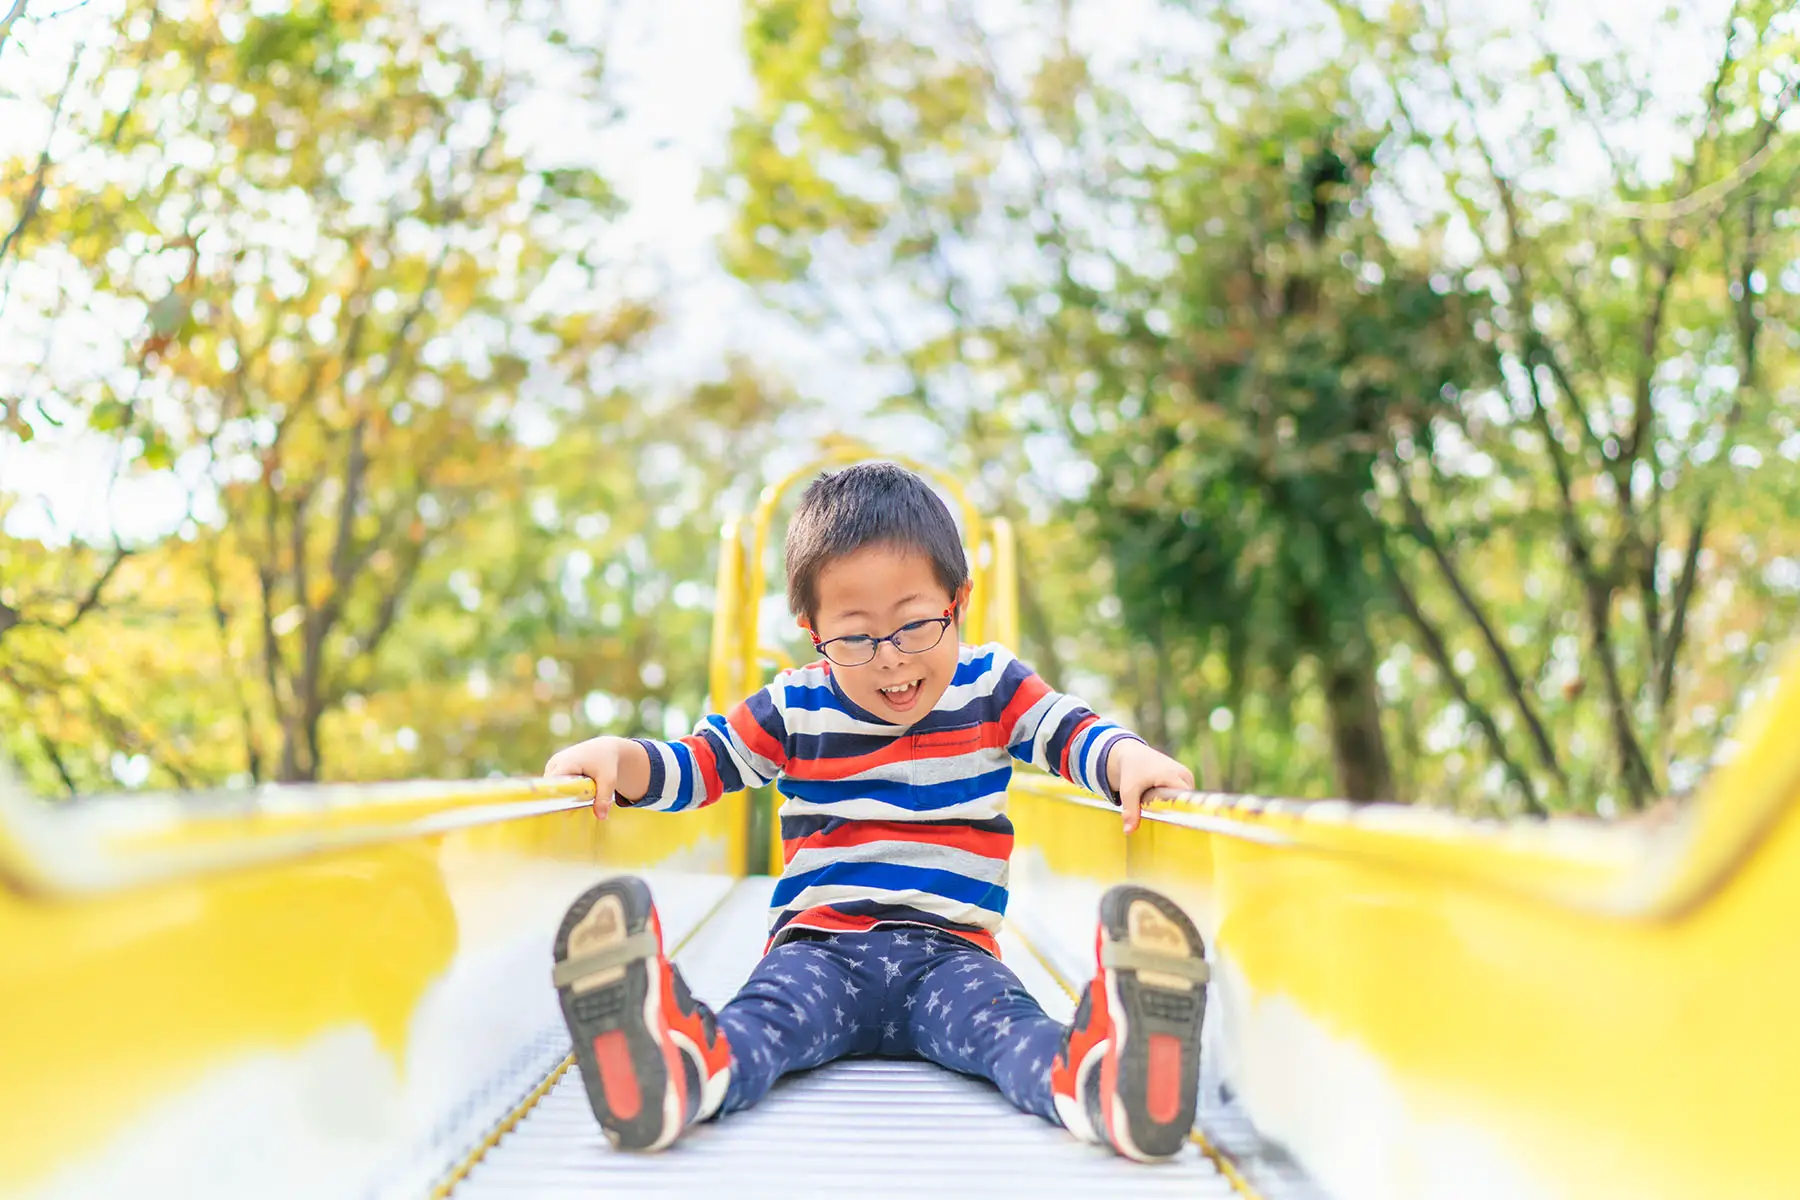 A small child with down syndrome is playing on a slide in a playground on a sunny day.